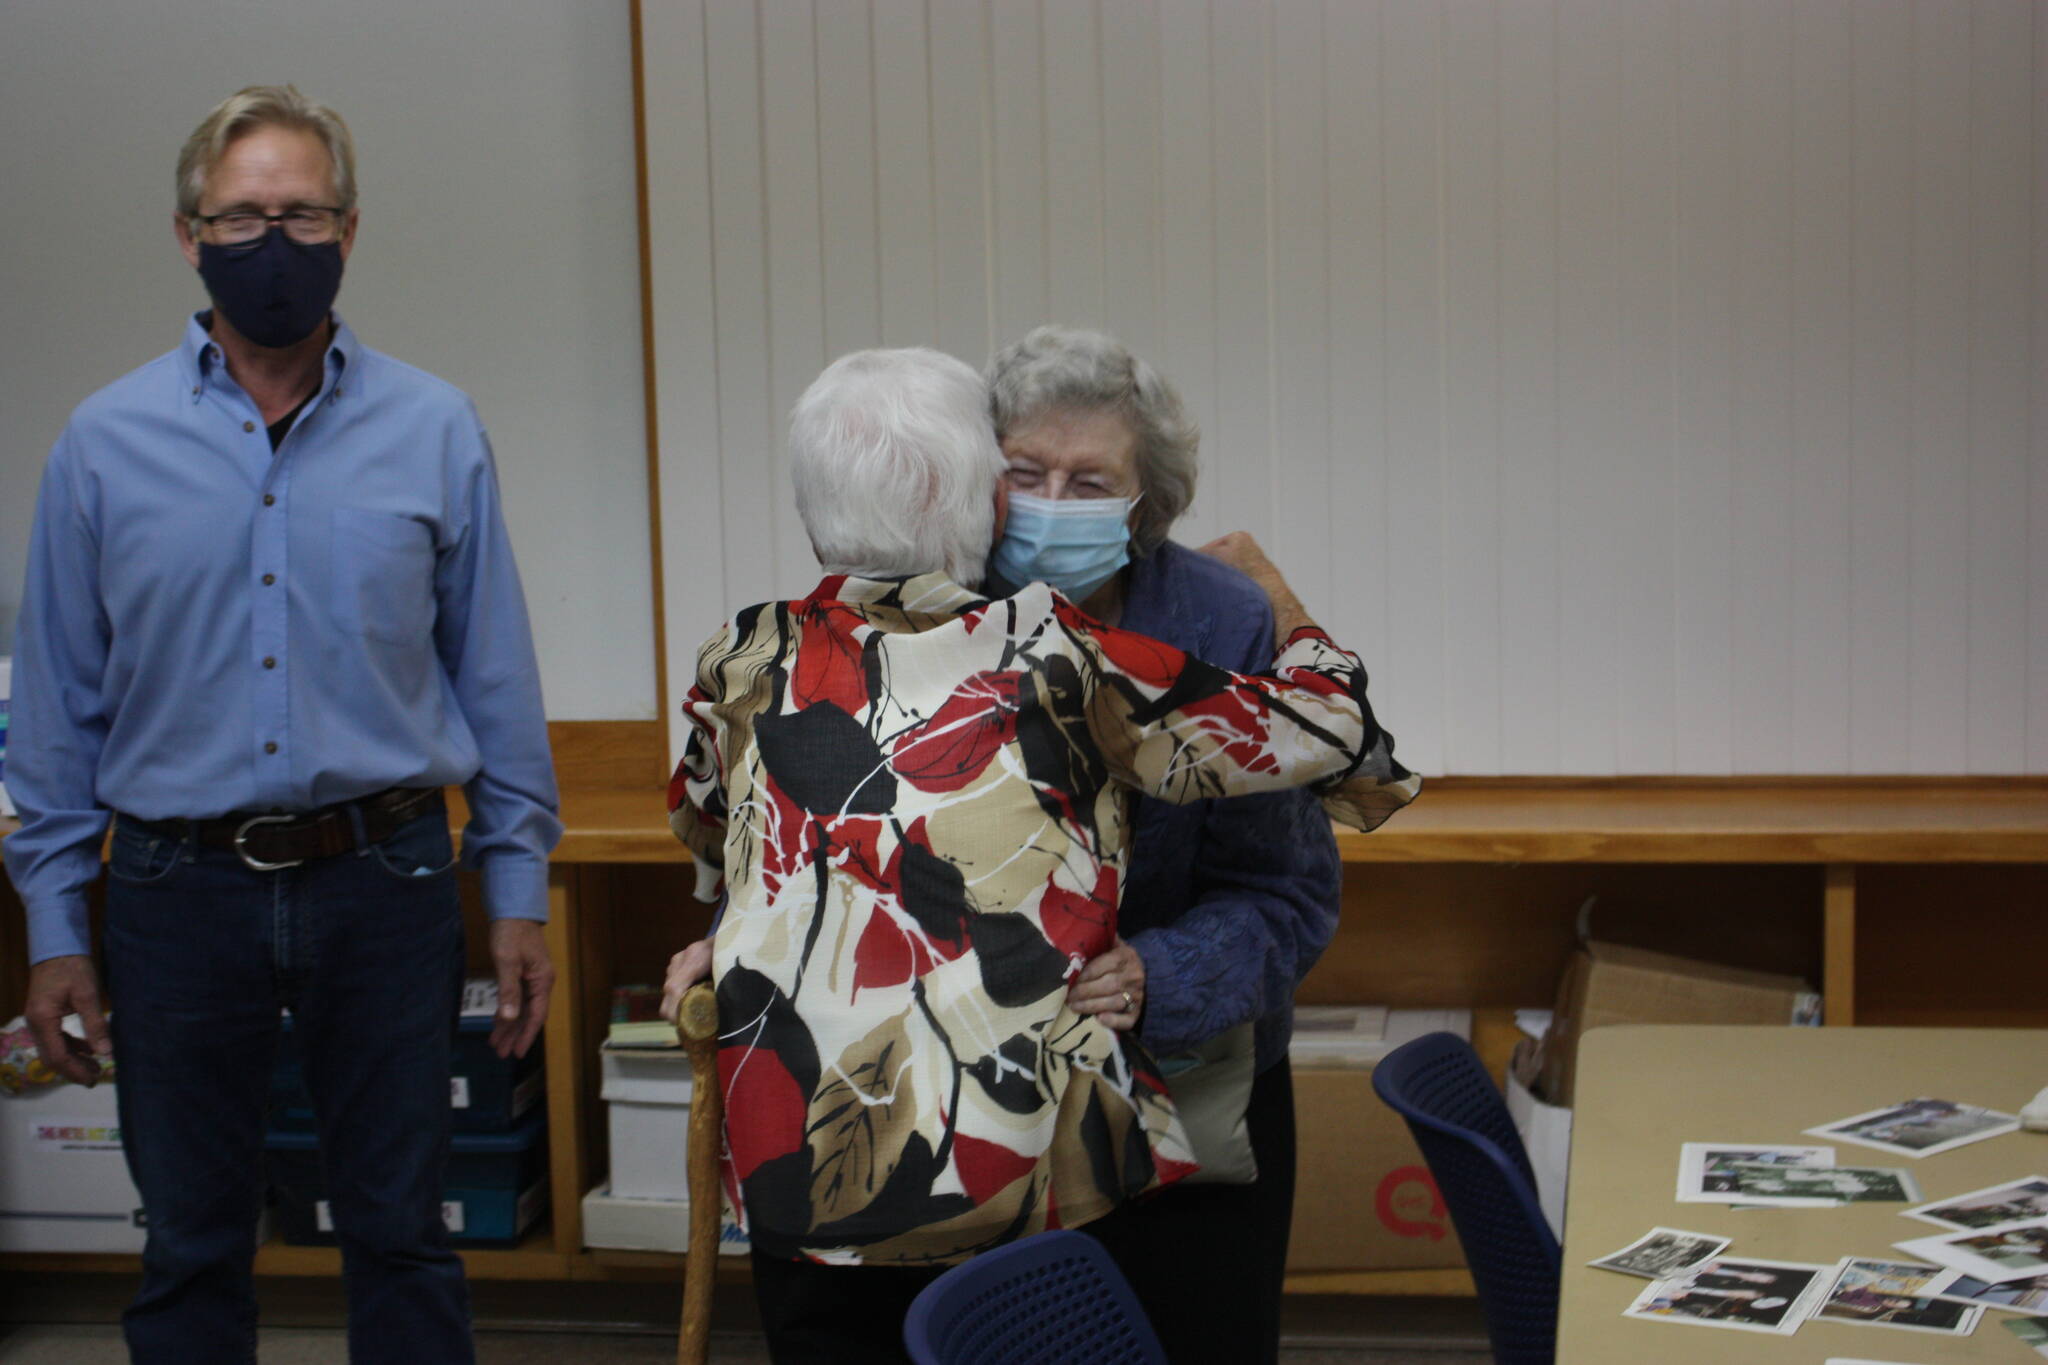 CAMERON SHEPPARD, Sound Publishing
Joan Nelson welcomes Mary Loop with a hug at the Kent High School Class of 1946 reunion Oct. 13 at the Kent Senior Center. Loop helped to found Kent Youth and Family Services.